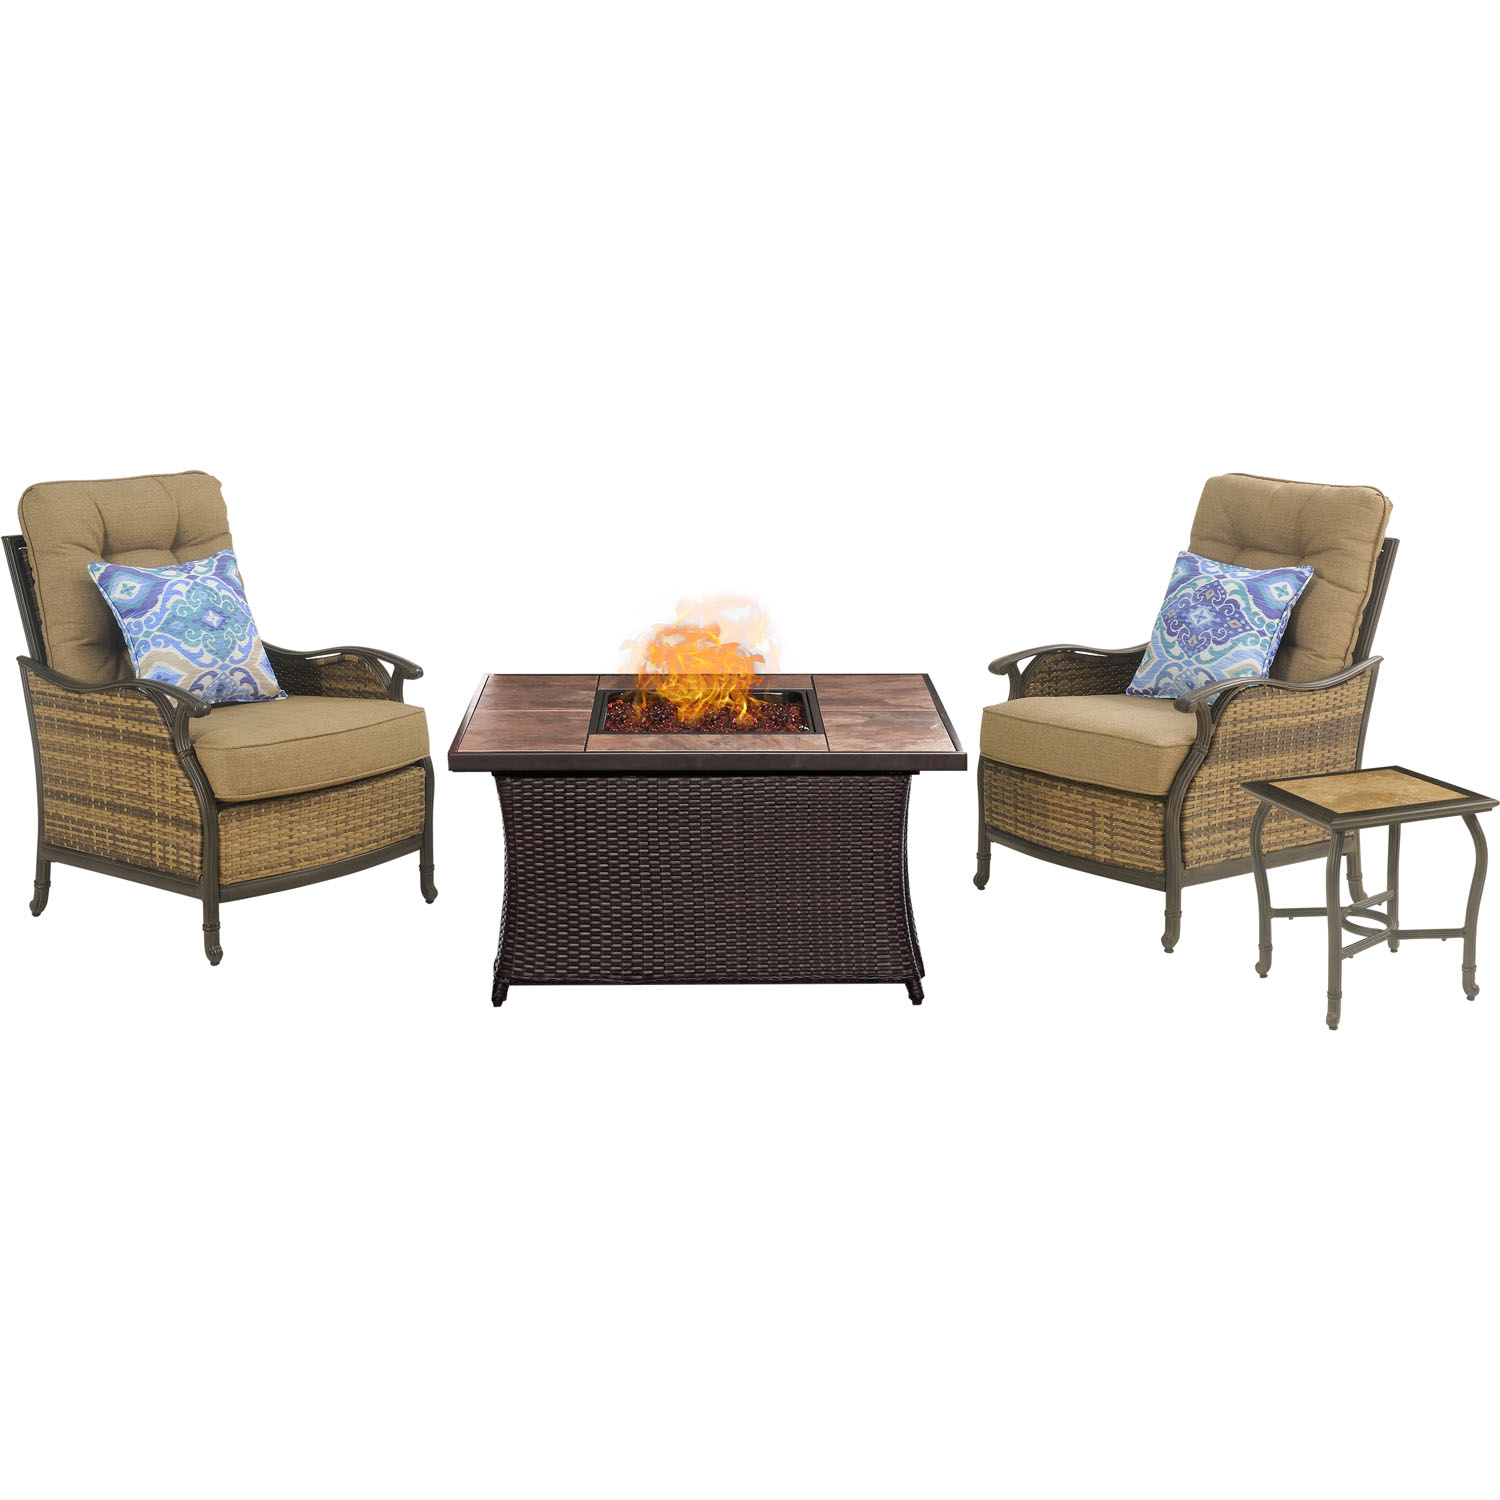 Hanover Hudson Square 4-Piece Fire Pit Lounge Set with Faux-Stone Tile Top - image 5 of 12